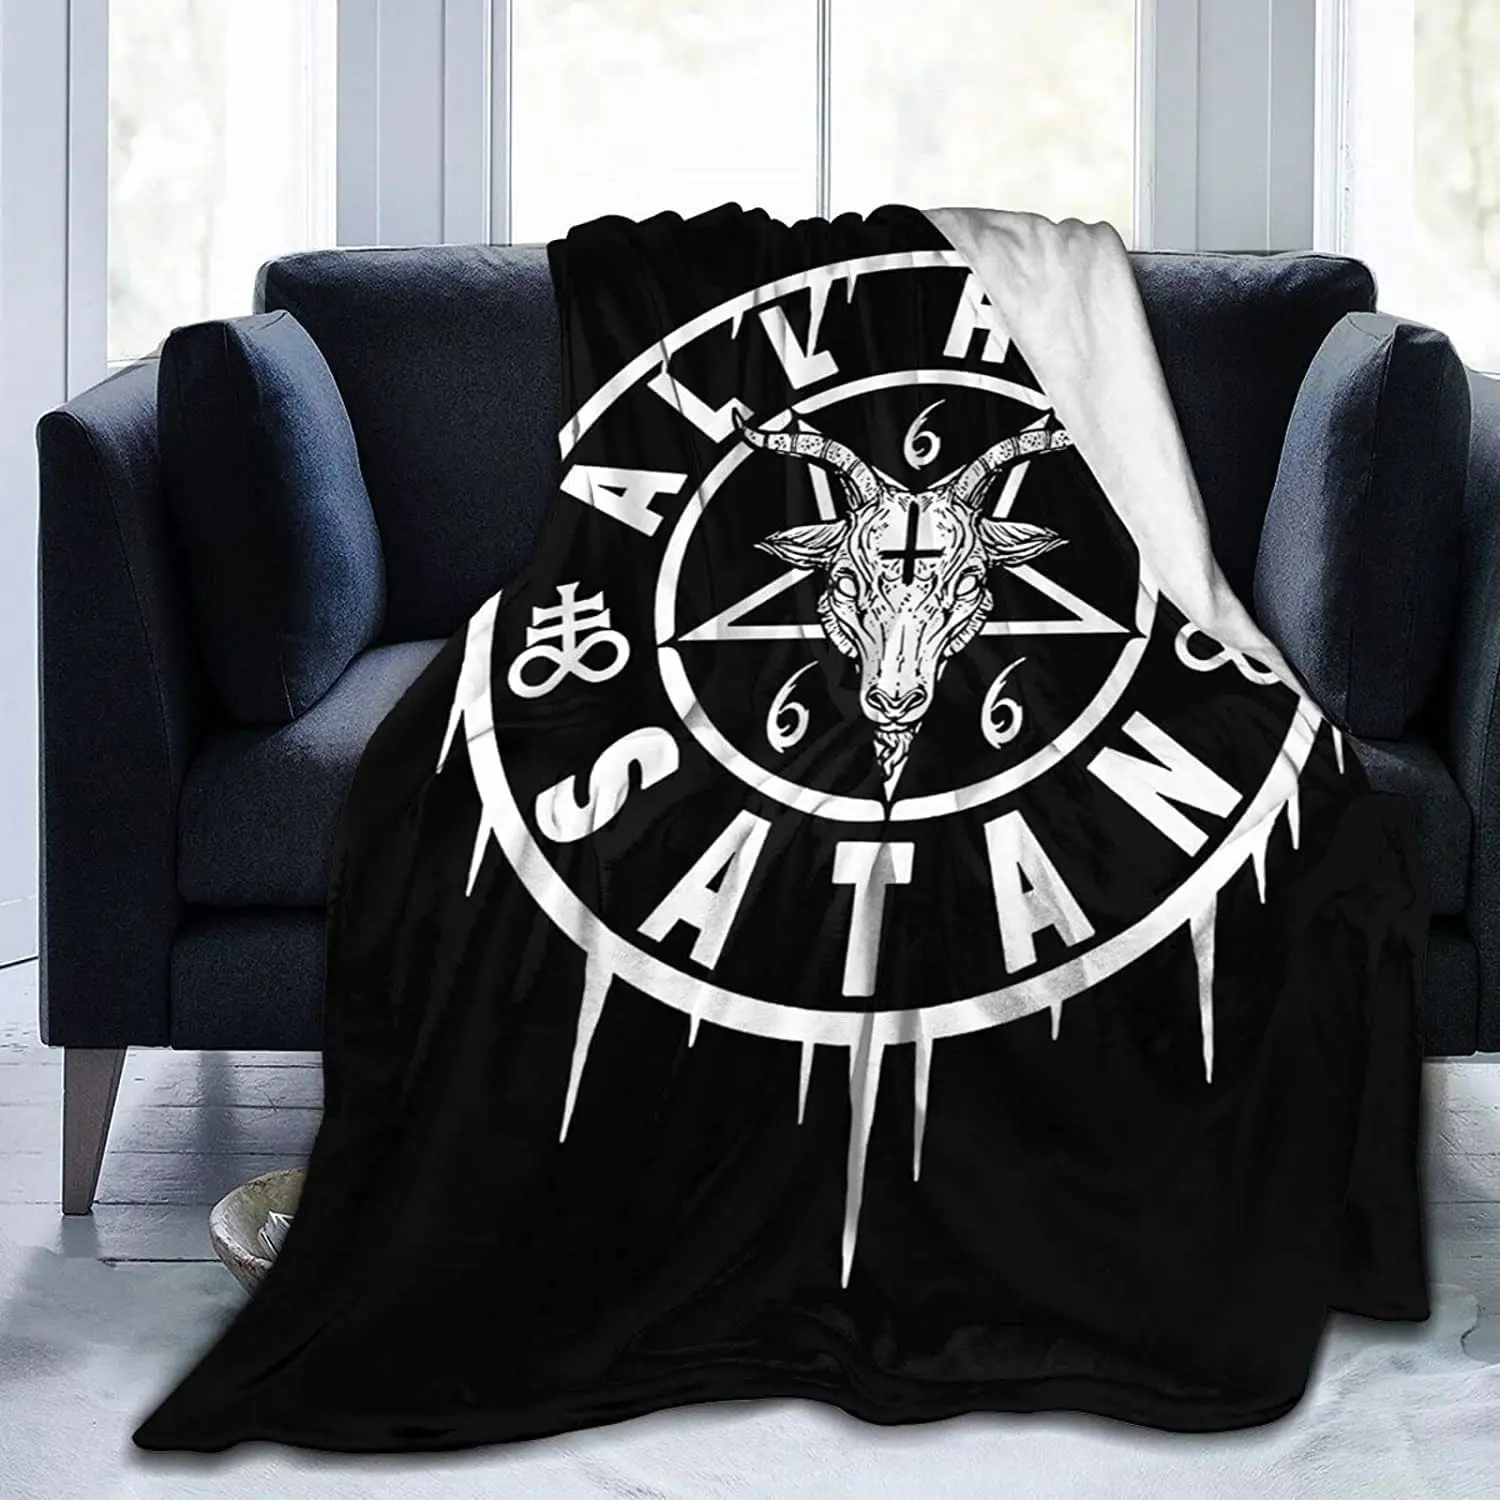 

Baphomet Blanket, Warm Home Soft Cozy Portable Fuzzy Throw Blankets for Couch Bed Sofa,Demon Baphomet Satanic Symbol Horror Goat